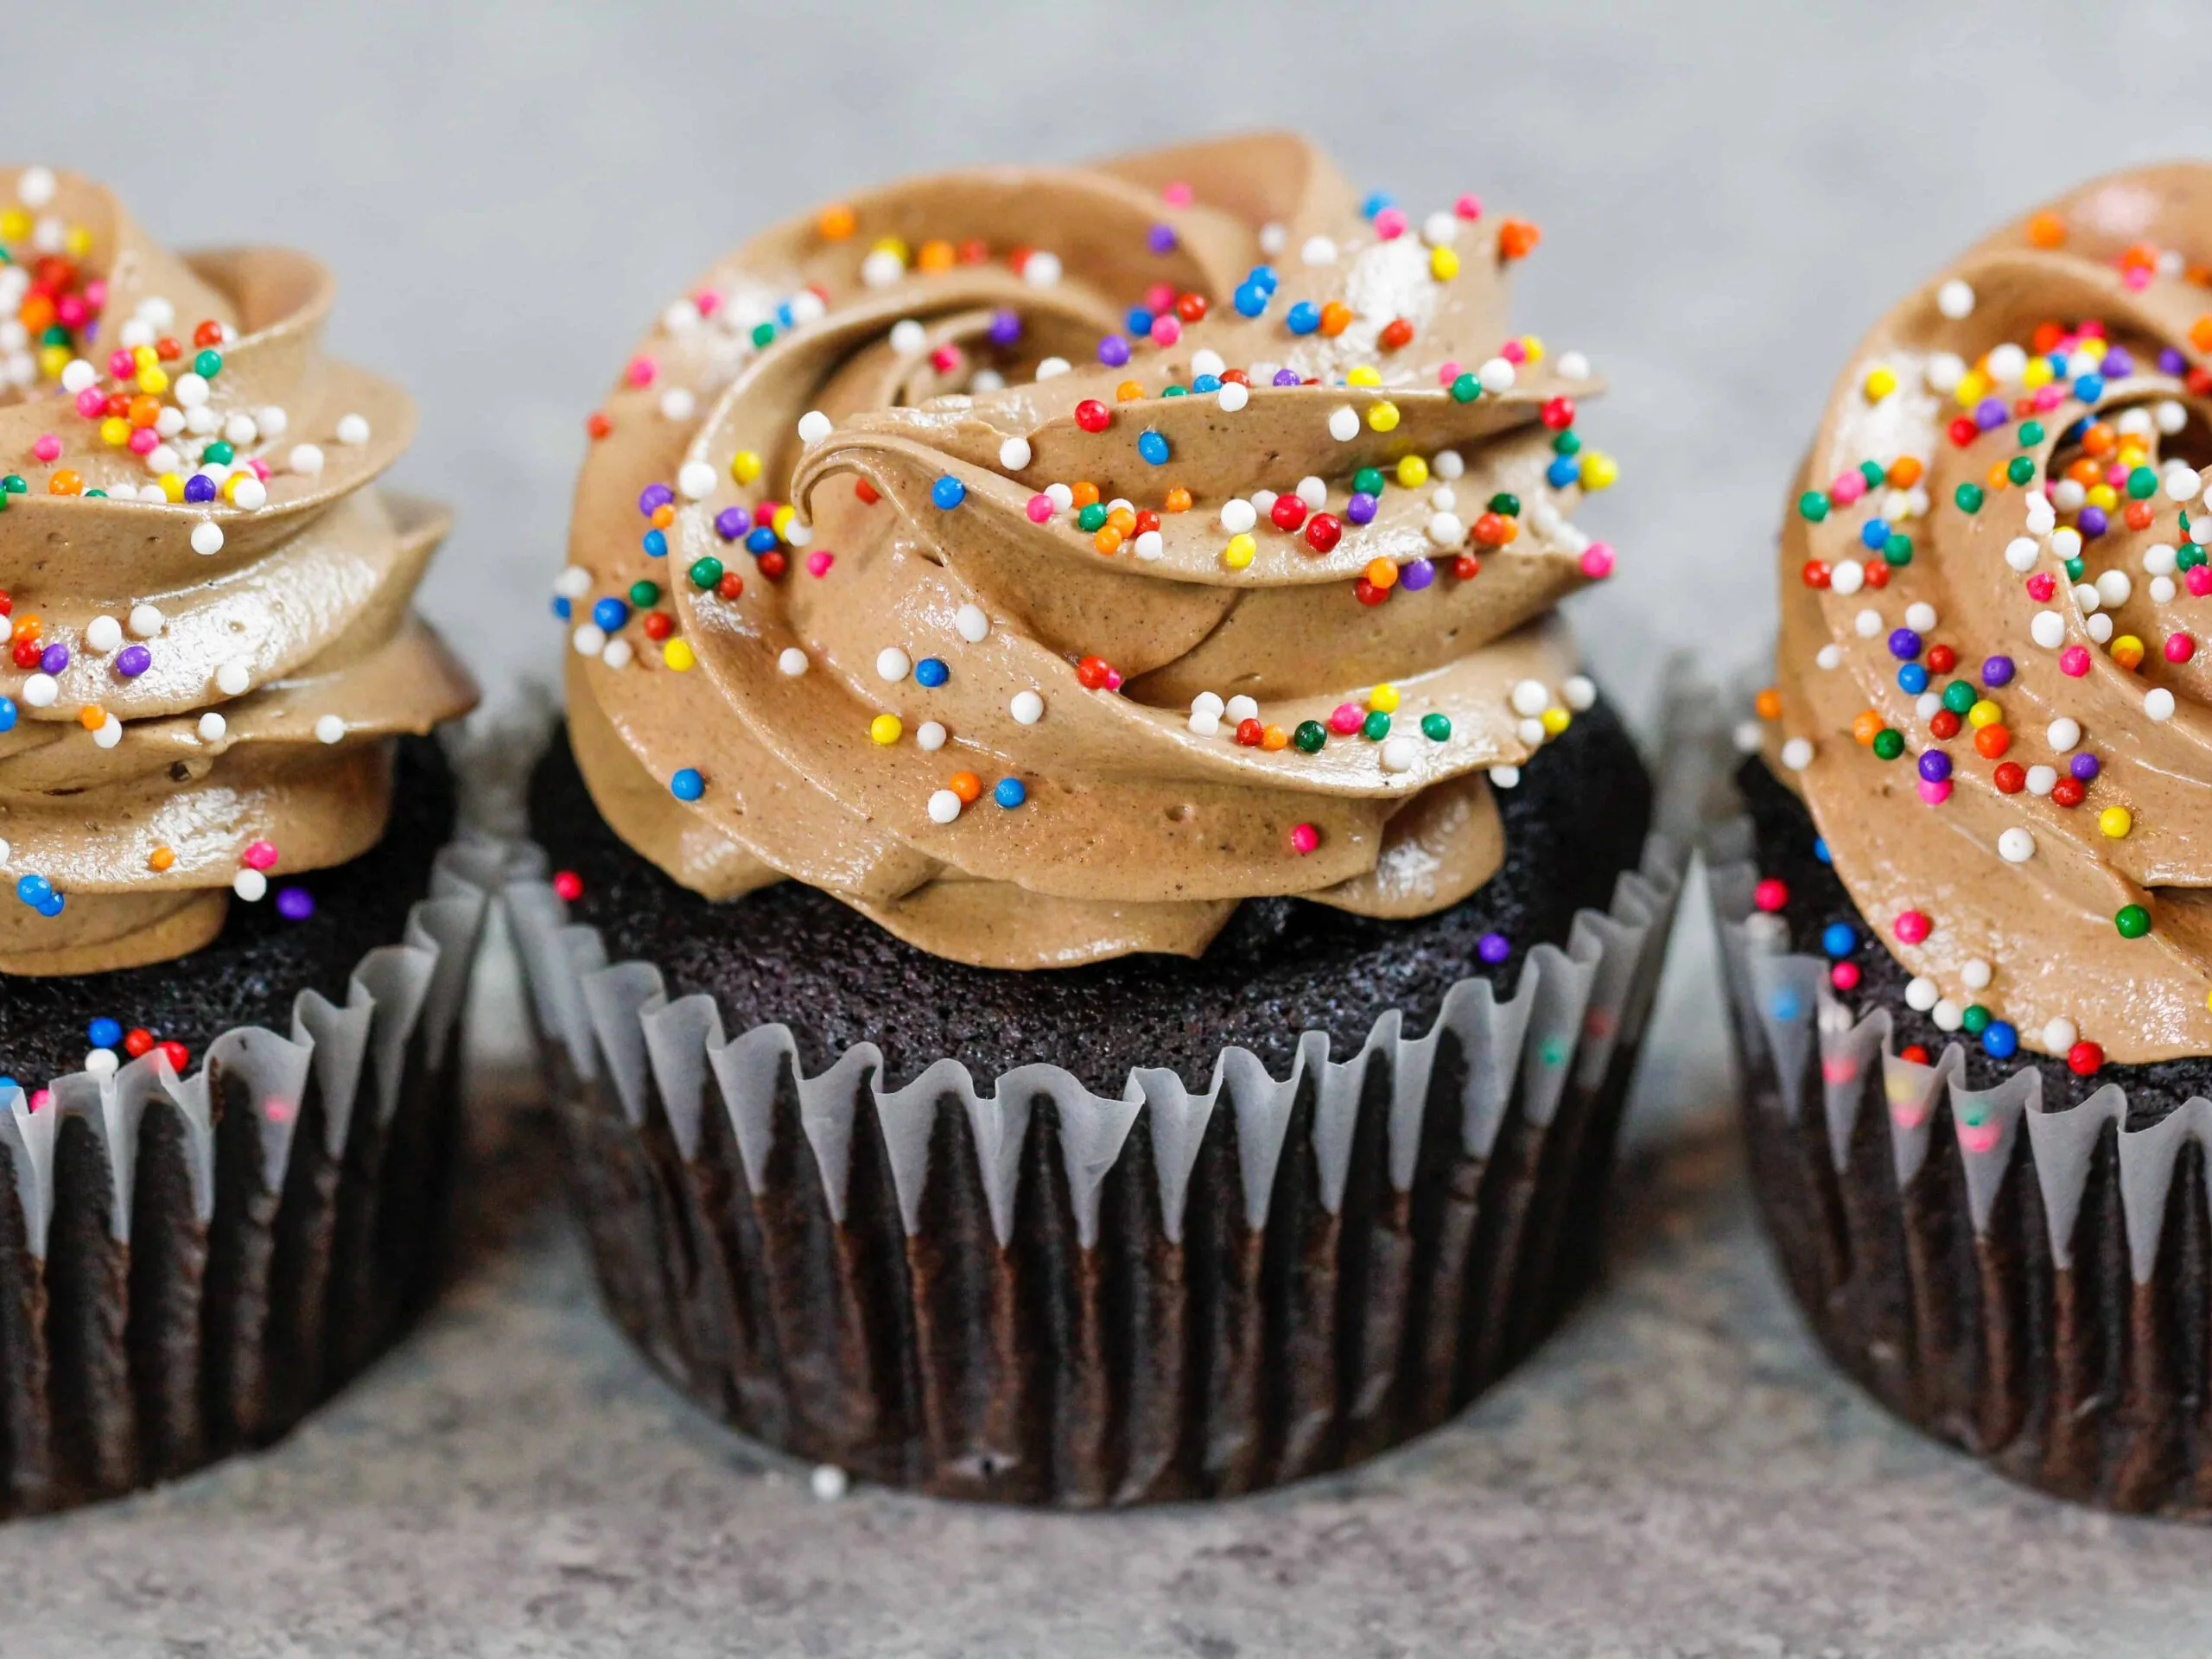 image of chocolate italian meringue buttercream frosting on top of cupcakes
